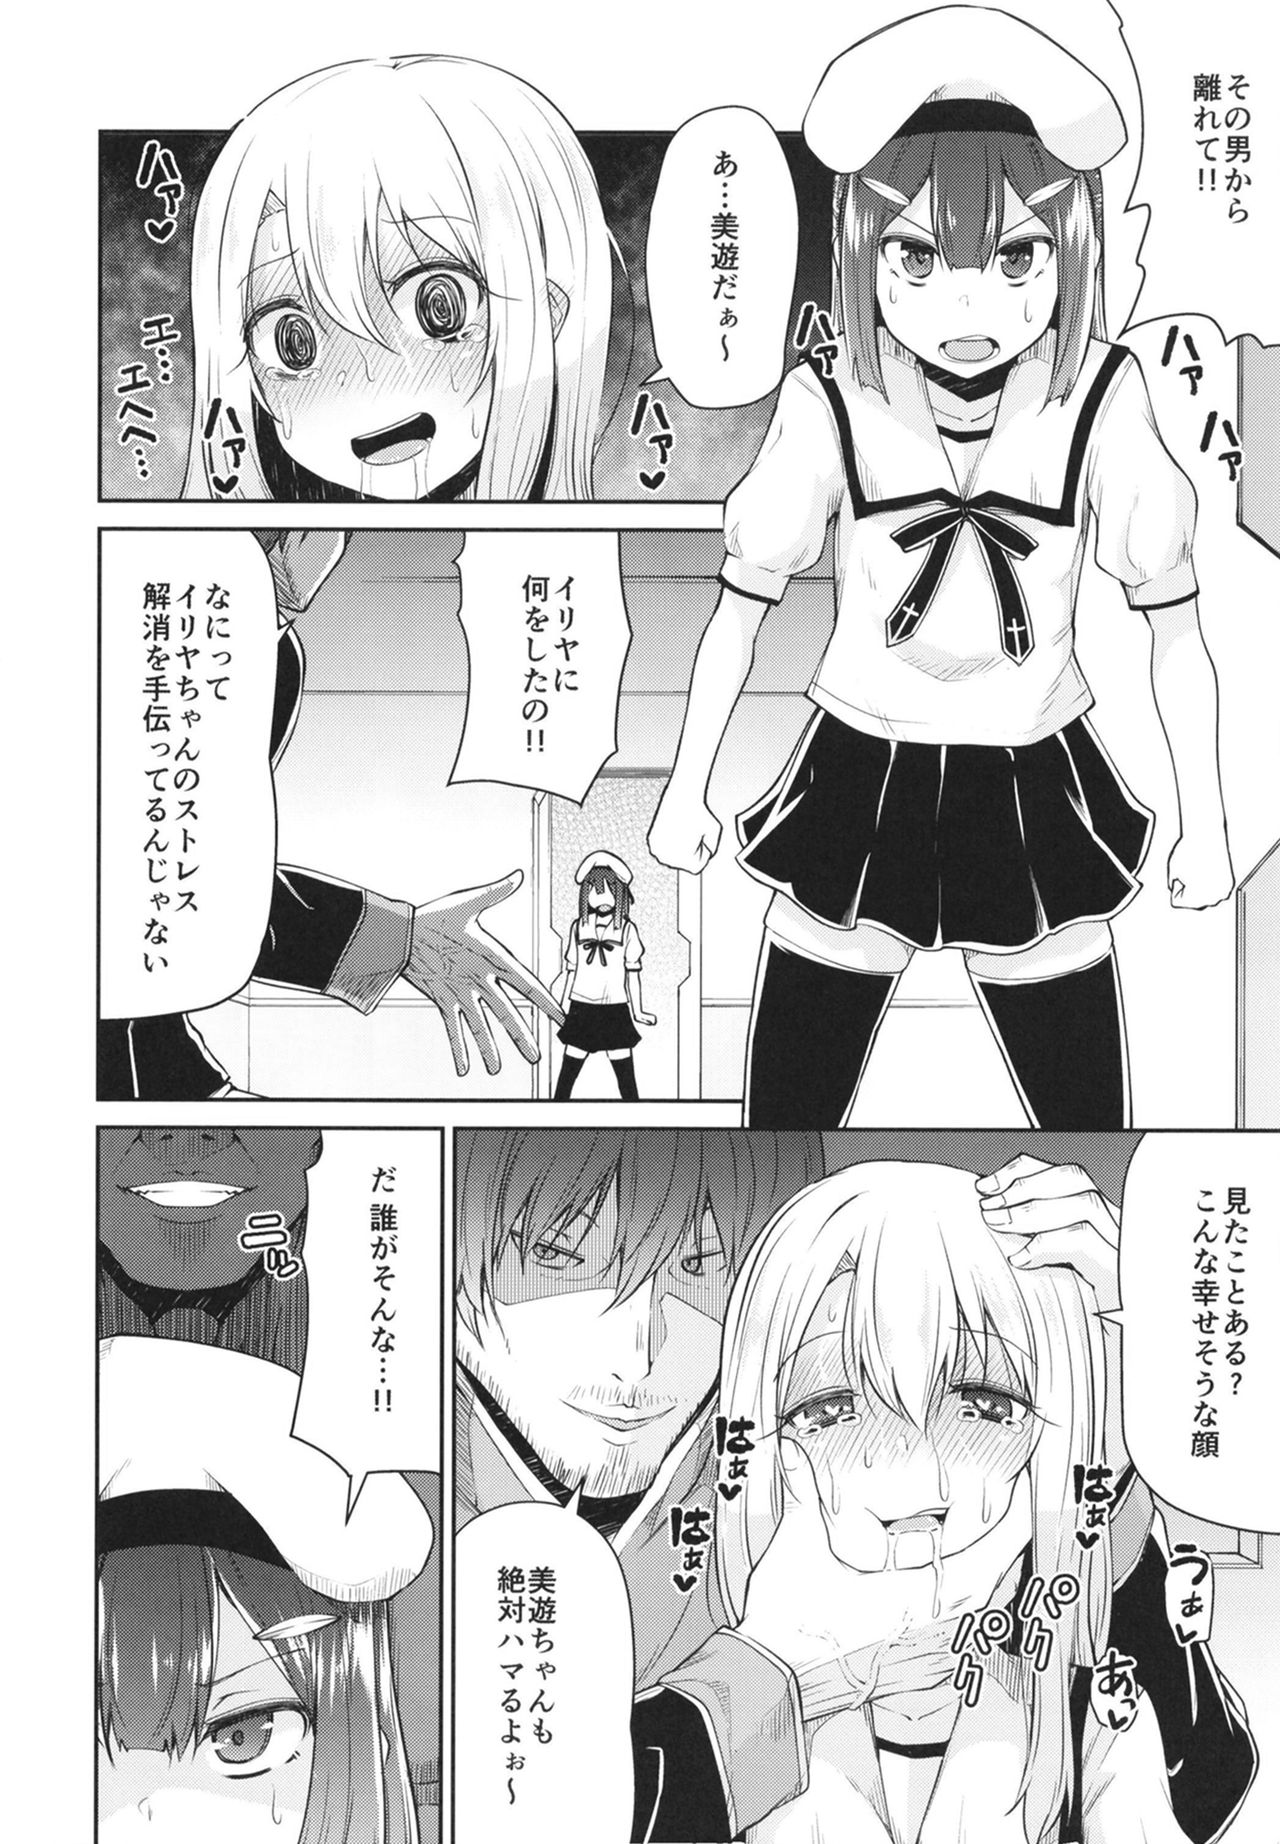 [Kitsuneya (Leafy)] Mahou Shoujo to Shiawase Game - Magical Girl and Happiness Game (Fate/Grand Order, Fate/kaleid liner Prisma Illya) [Digital] page 8 full